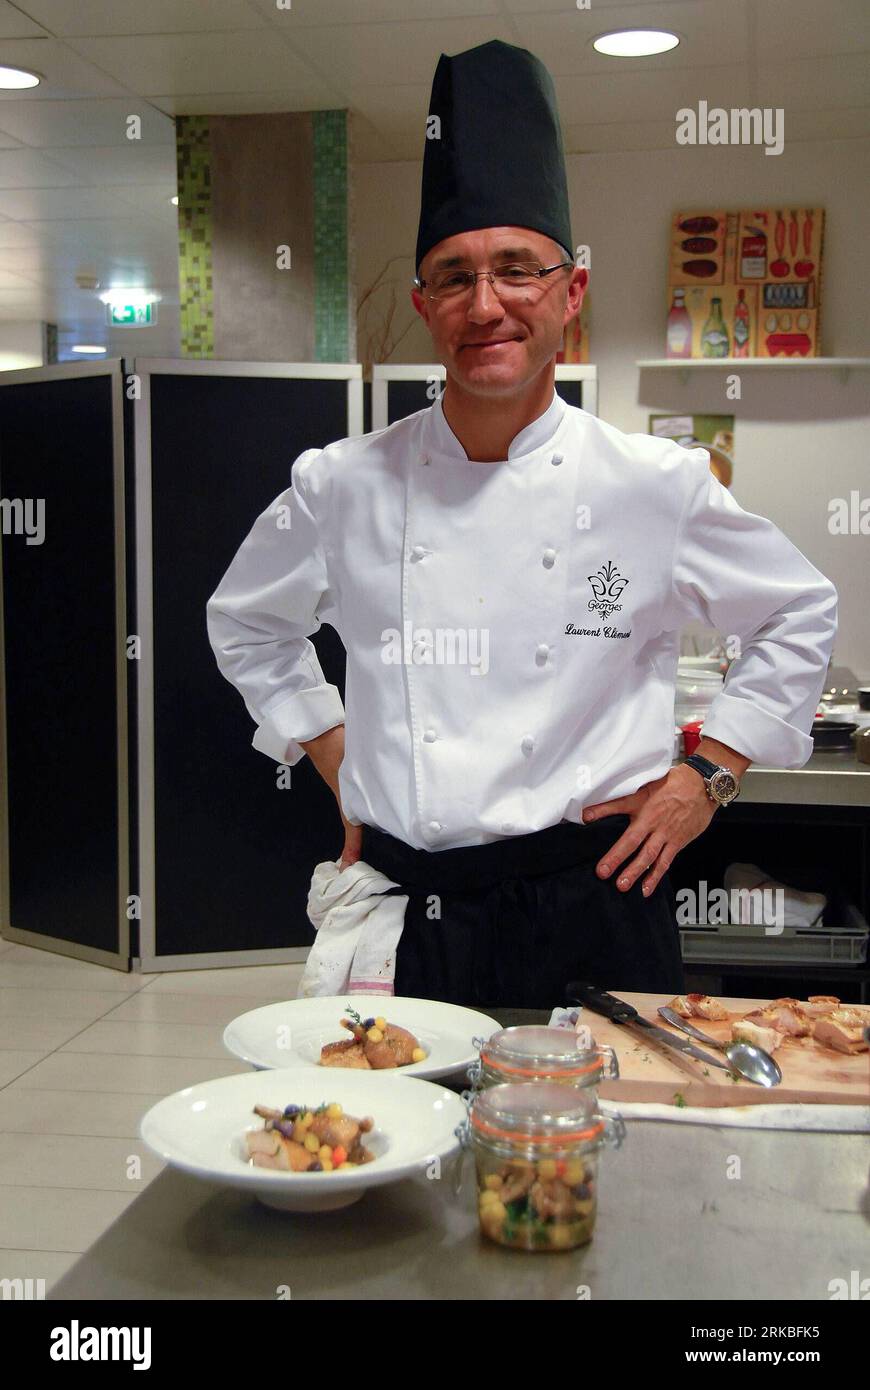 Bildnummer: 54551337  Datum: 20.10.2010  Copyright: imago/Xinhua (101020) -- PARIS, Oct. 20, 2010 (Xinhua) -- Starred chef Laurent Clement poses with his dish during the Who s the Chef? competition in the Market BHV in Paris, France, Oct. 20, 2010. The ordinary challenge the starred chef Laurent Clement with a dish of French cuisine in the competition, while the judges are chosen from the customers in the market. The overall winner will win a night for two at the Luxury Hotel and a gourmet meal at the restaurant of the hotel. (Xinhua/Zhang Yina) (zw) FRANCE-PARIS-WHO S THE CHEF PUBLICATIONxNOT Stock Photo